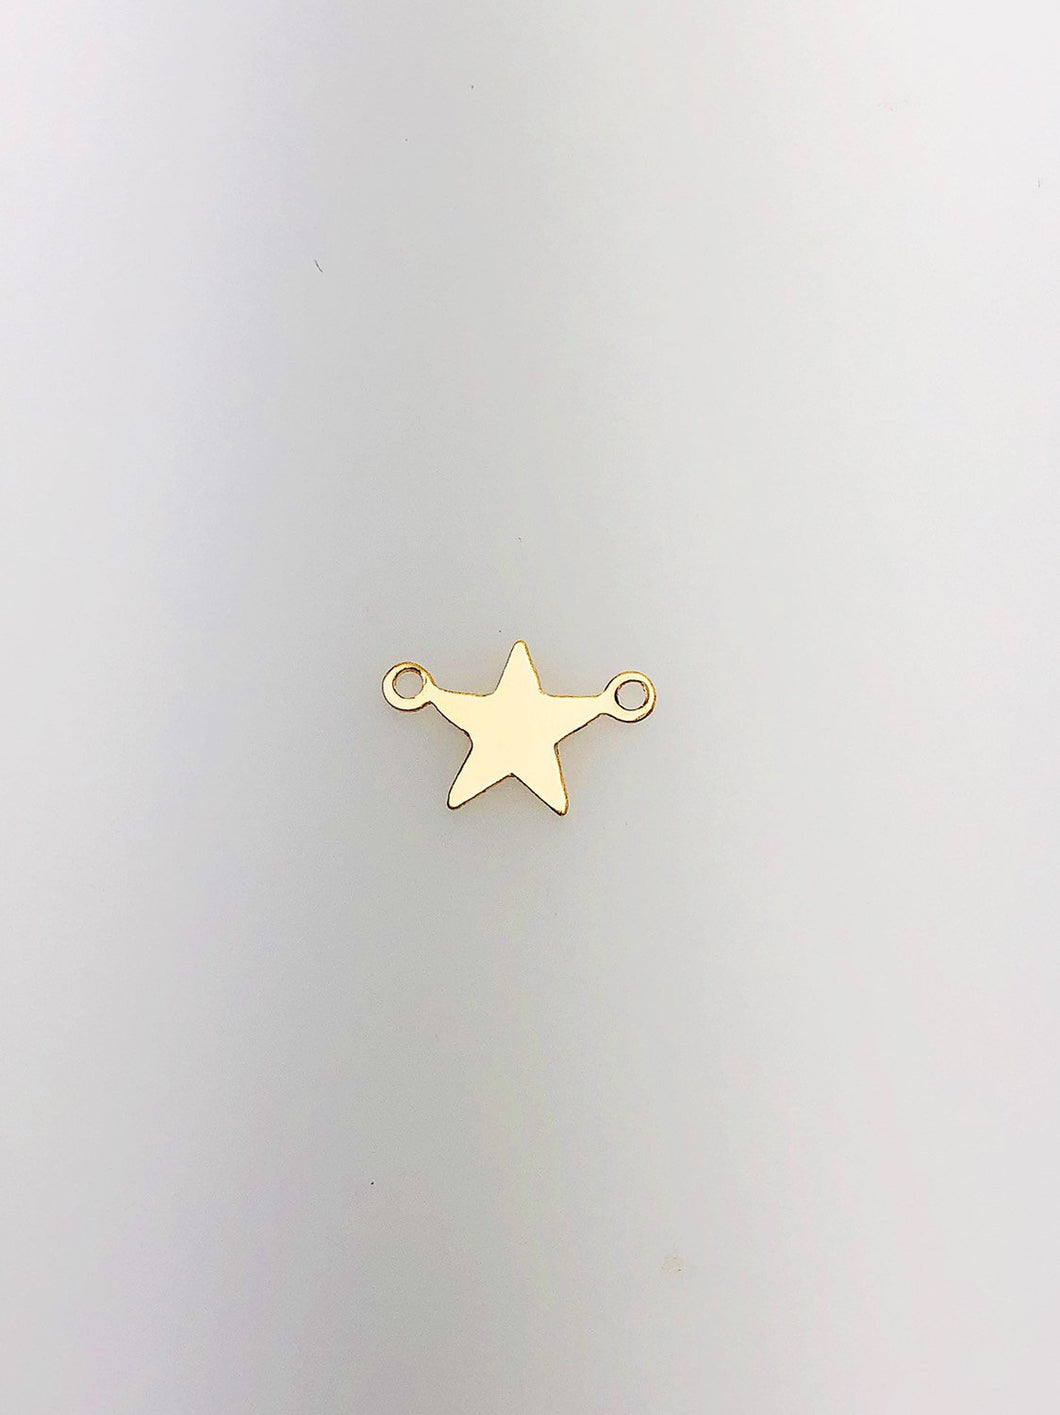 14K Gold Fill Star Charm w/ two Rings, 11.4x7.4mm, Made in USA - 111